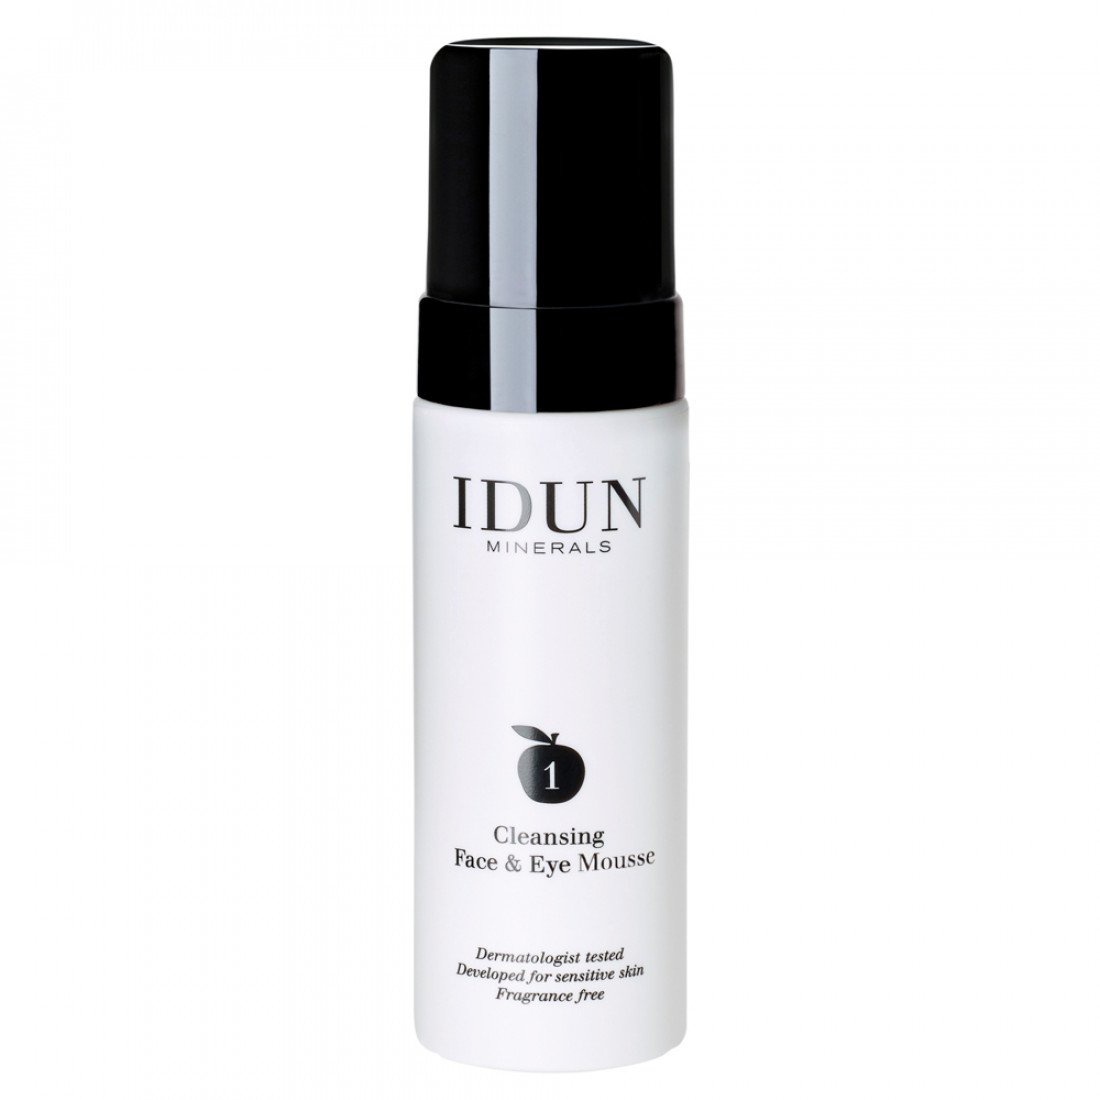 IDUN Minerals Cleansing Face & Eye Mousse